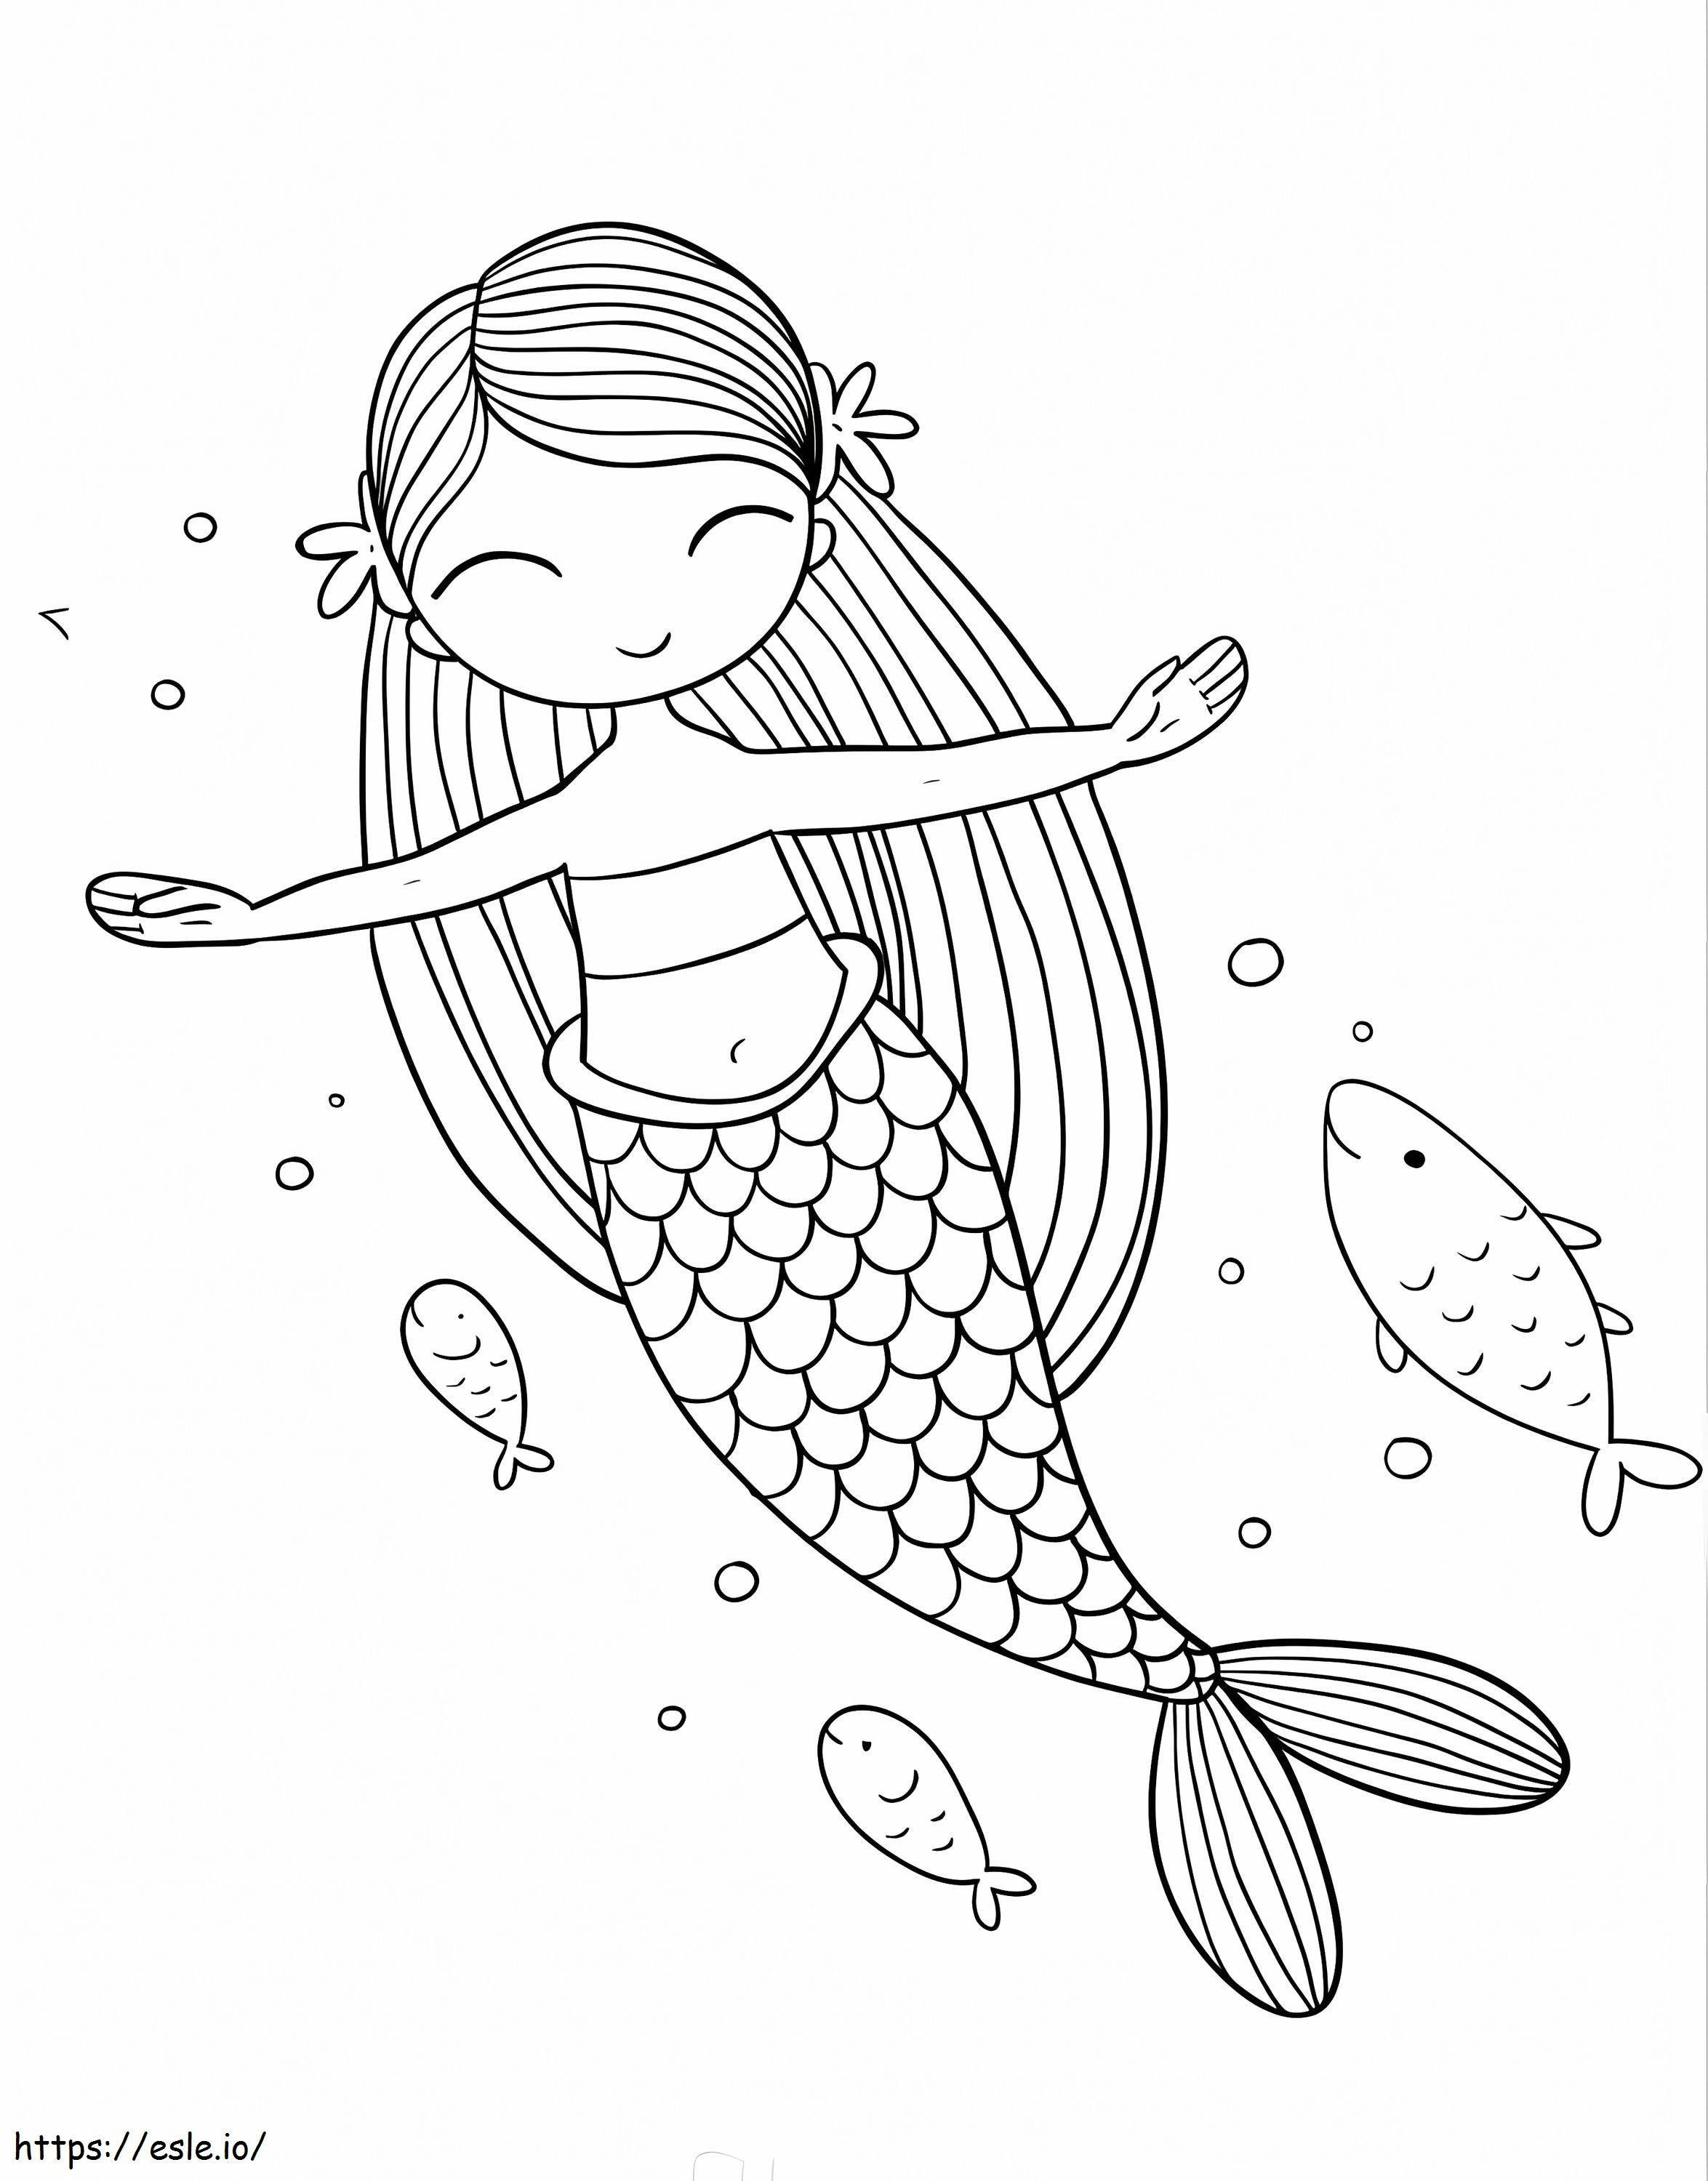 Mermaid With Fishes coloring page